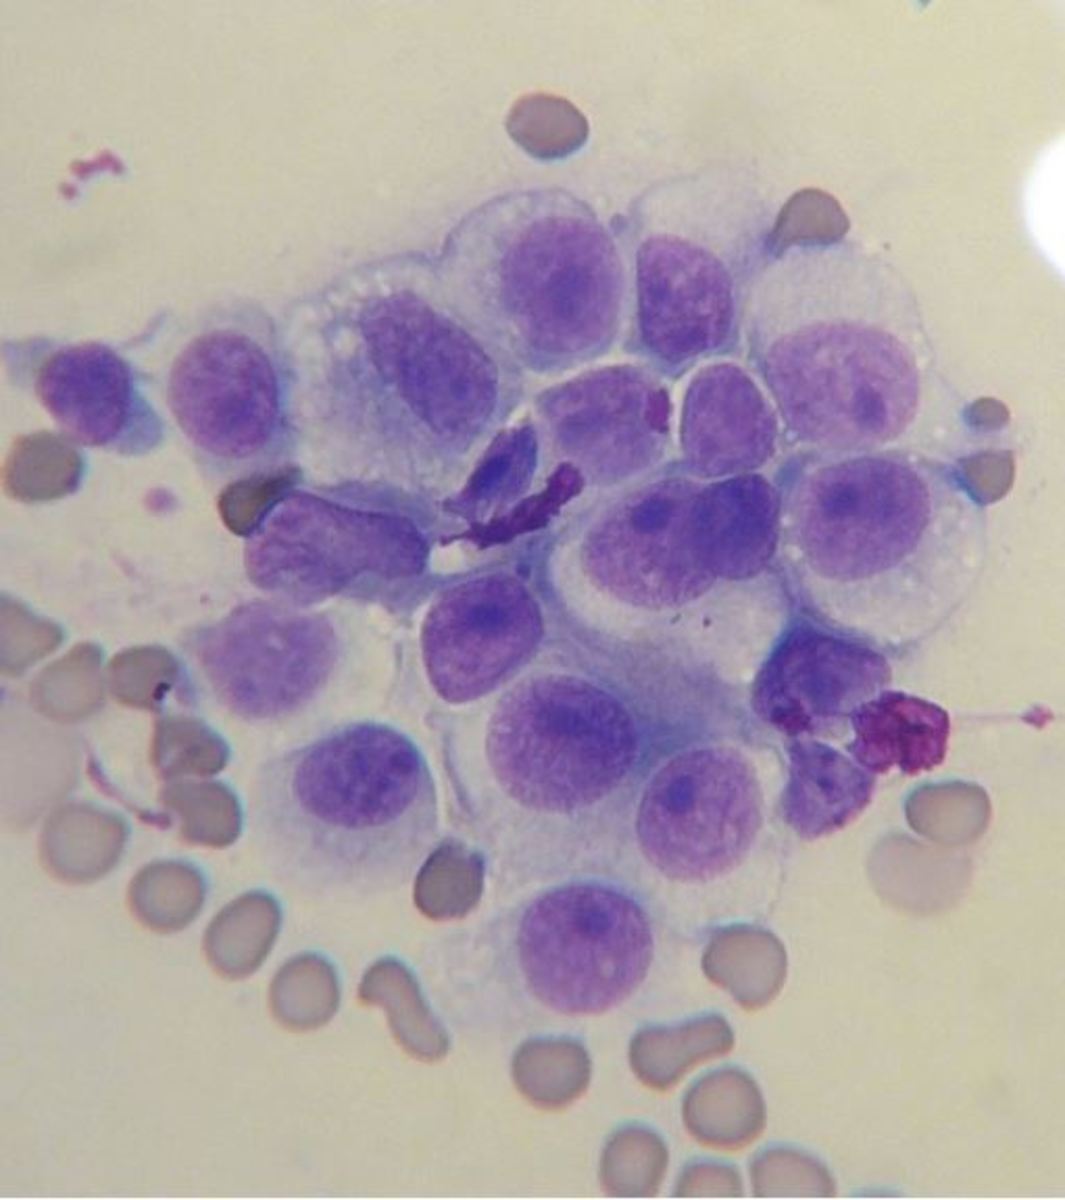  Cytology from a needle aspiration biopsy of a canine transmissible venereal tumor.